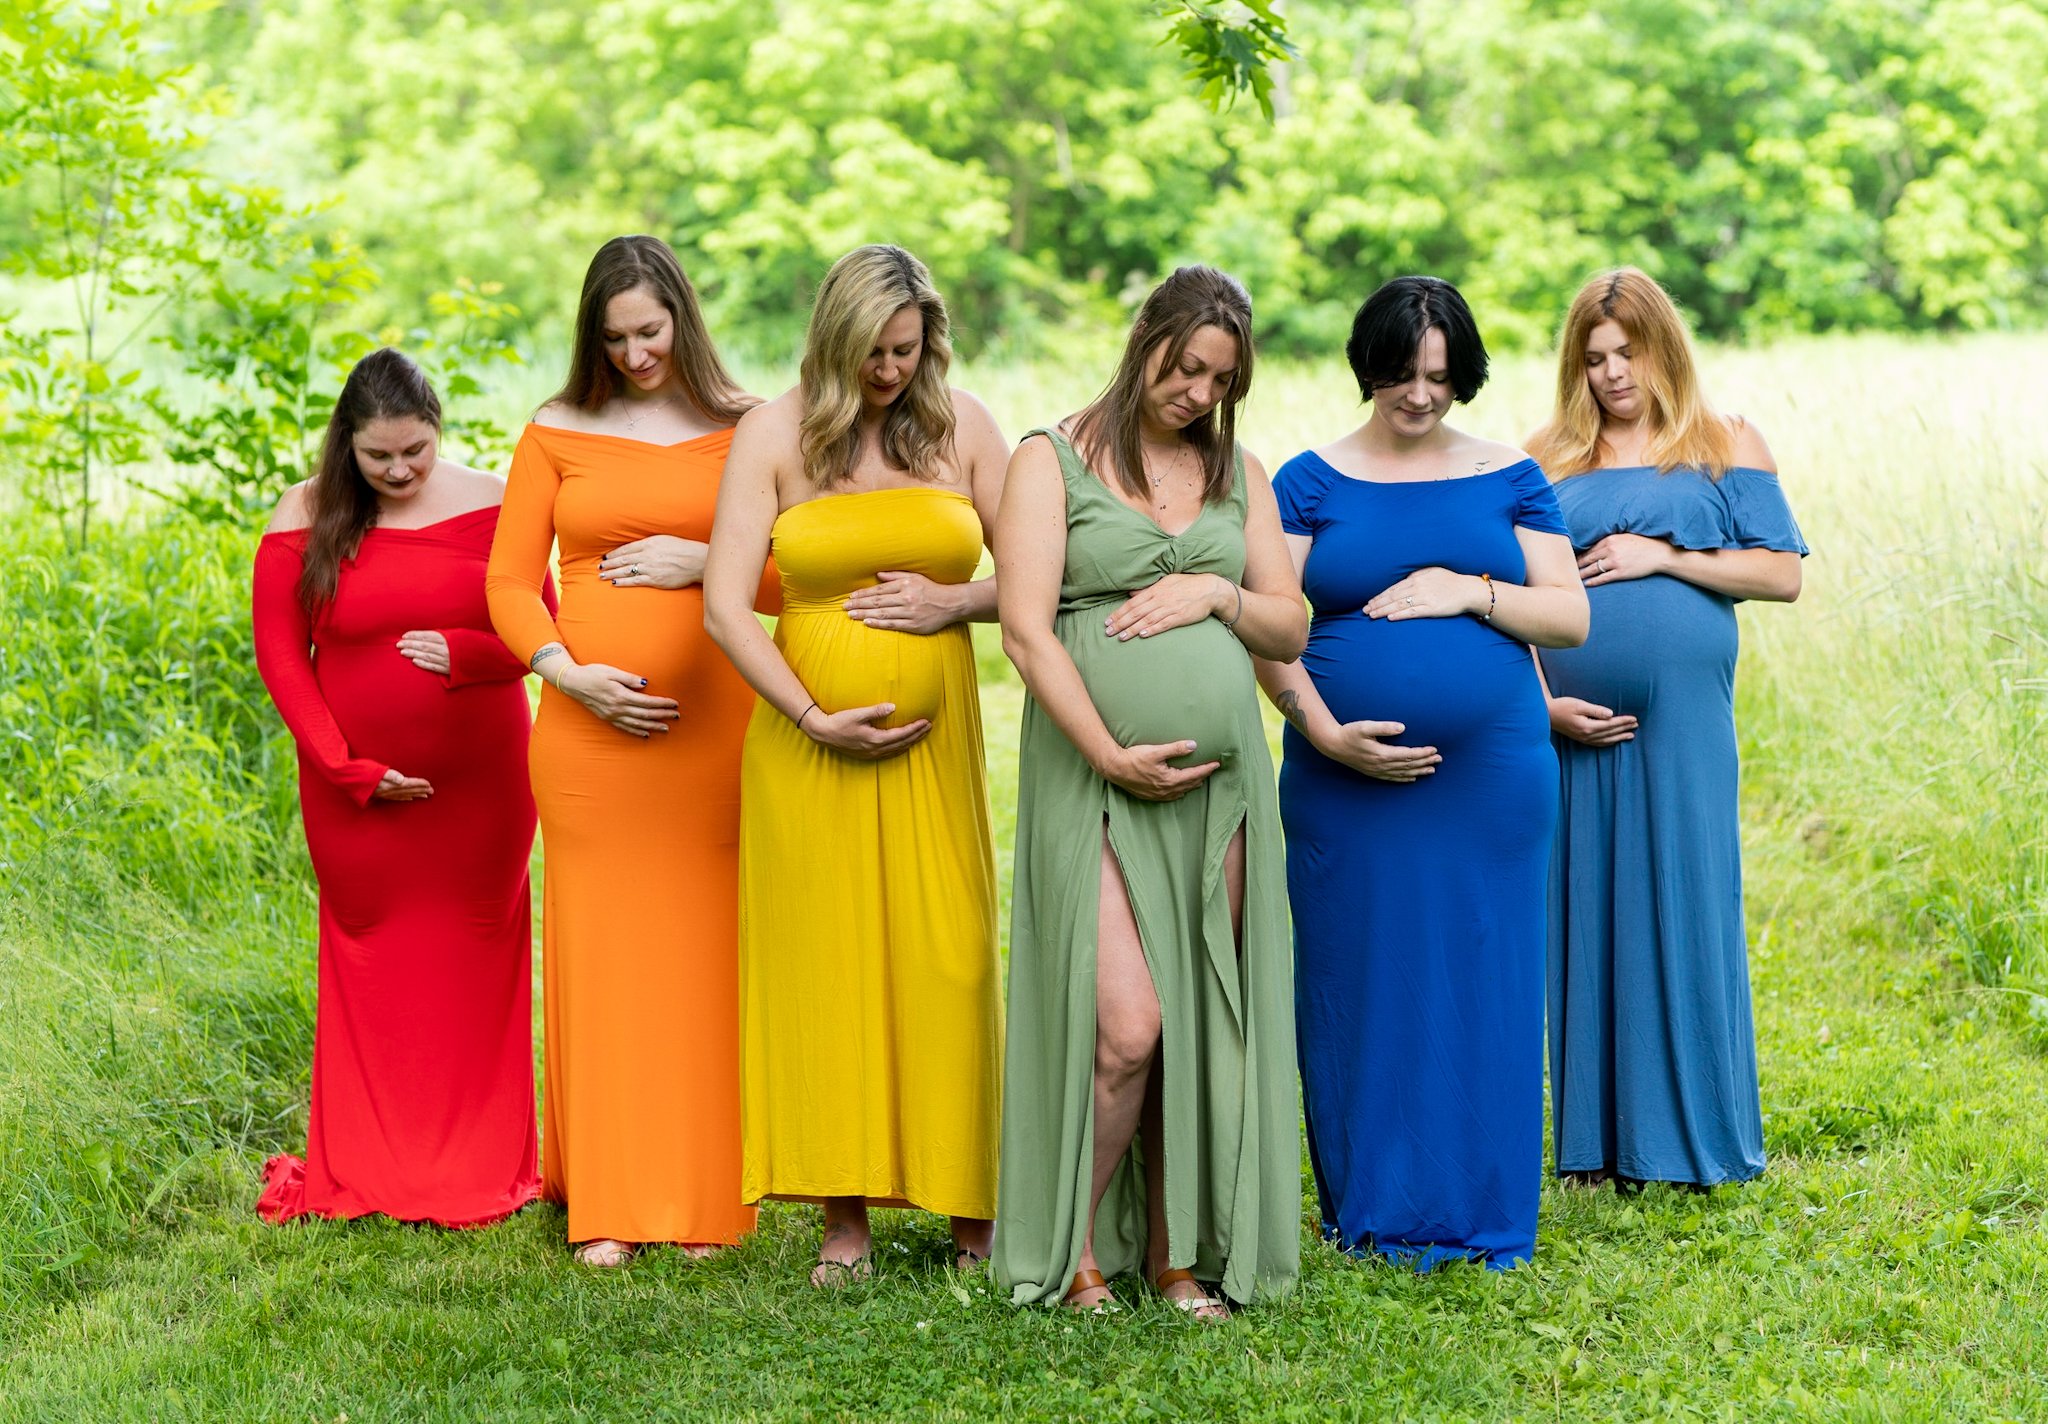 pregnant mothers holding their baby bumps and looking down at them in dress colors that make the rainbow at paw paw picnic area 